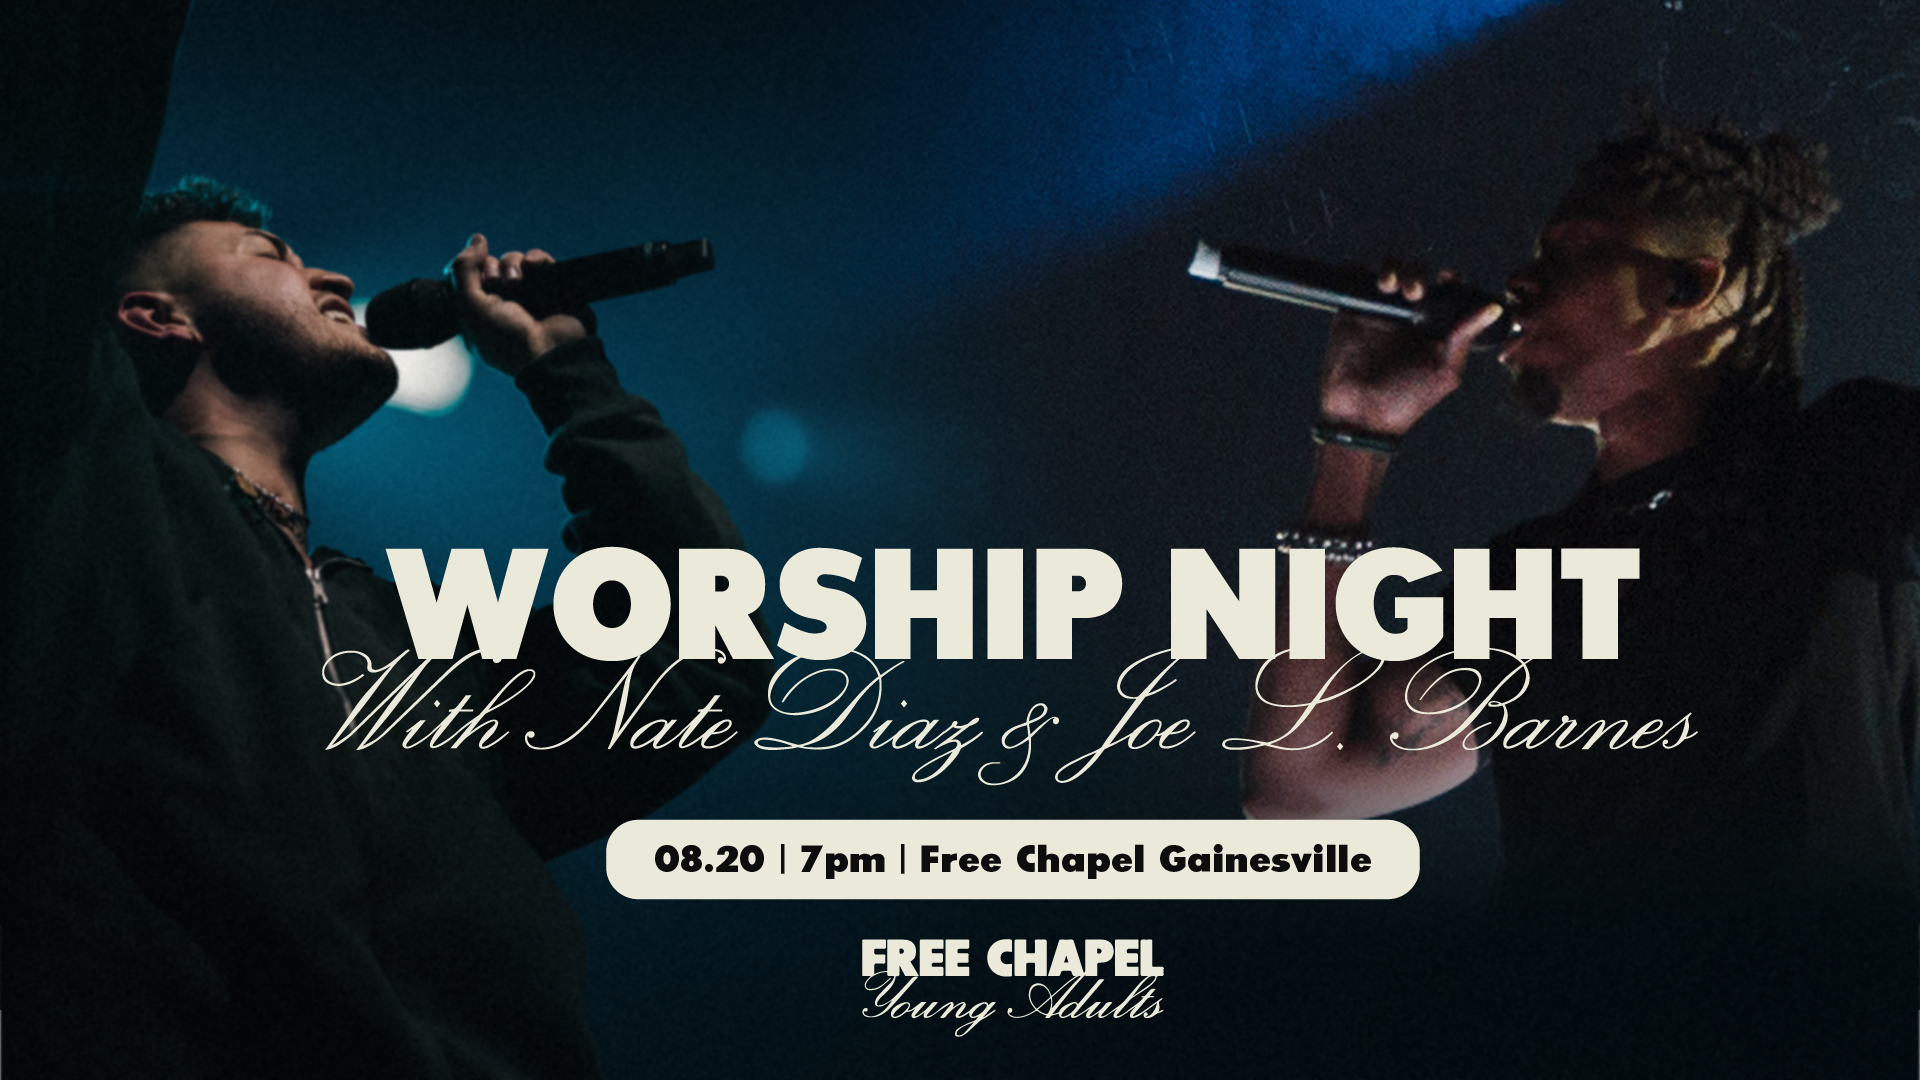 Young Adults United Worship Night with Nate Diaz & Joe L. Barnes at the Gainesville campus